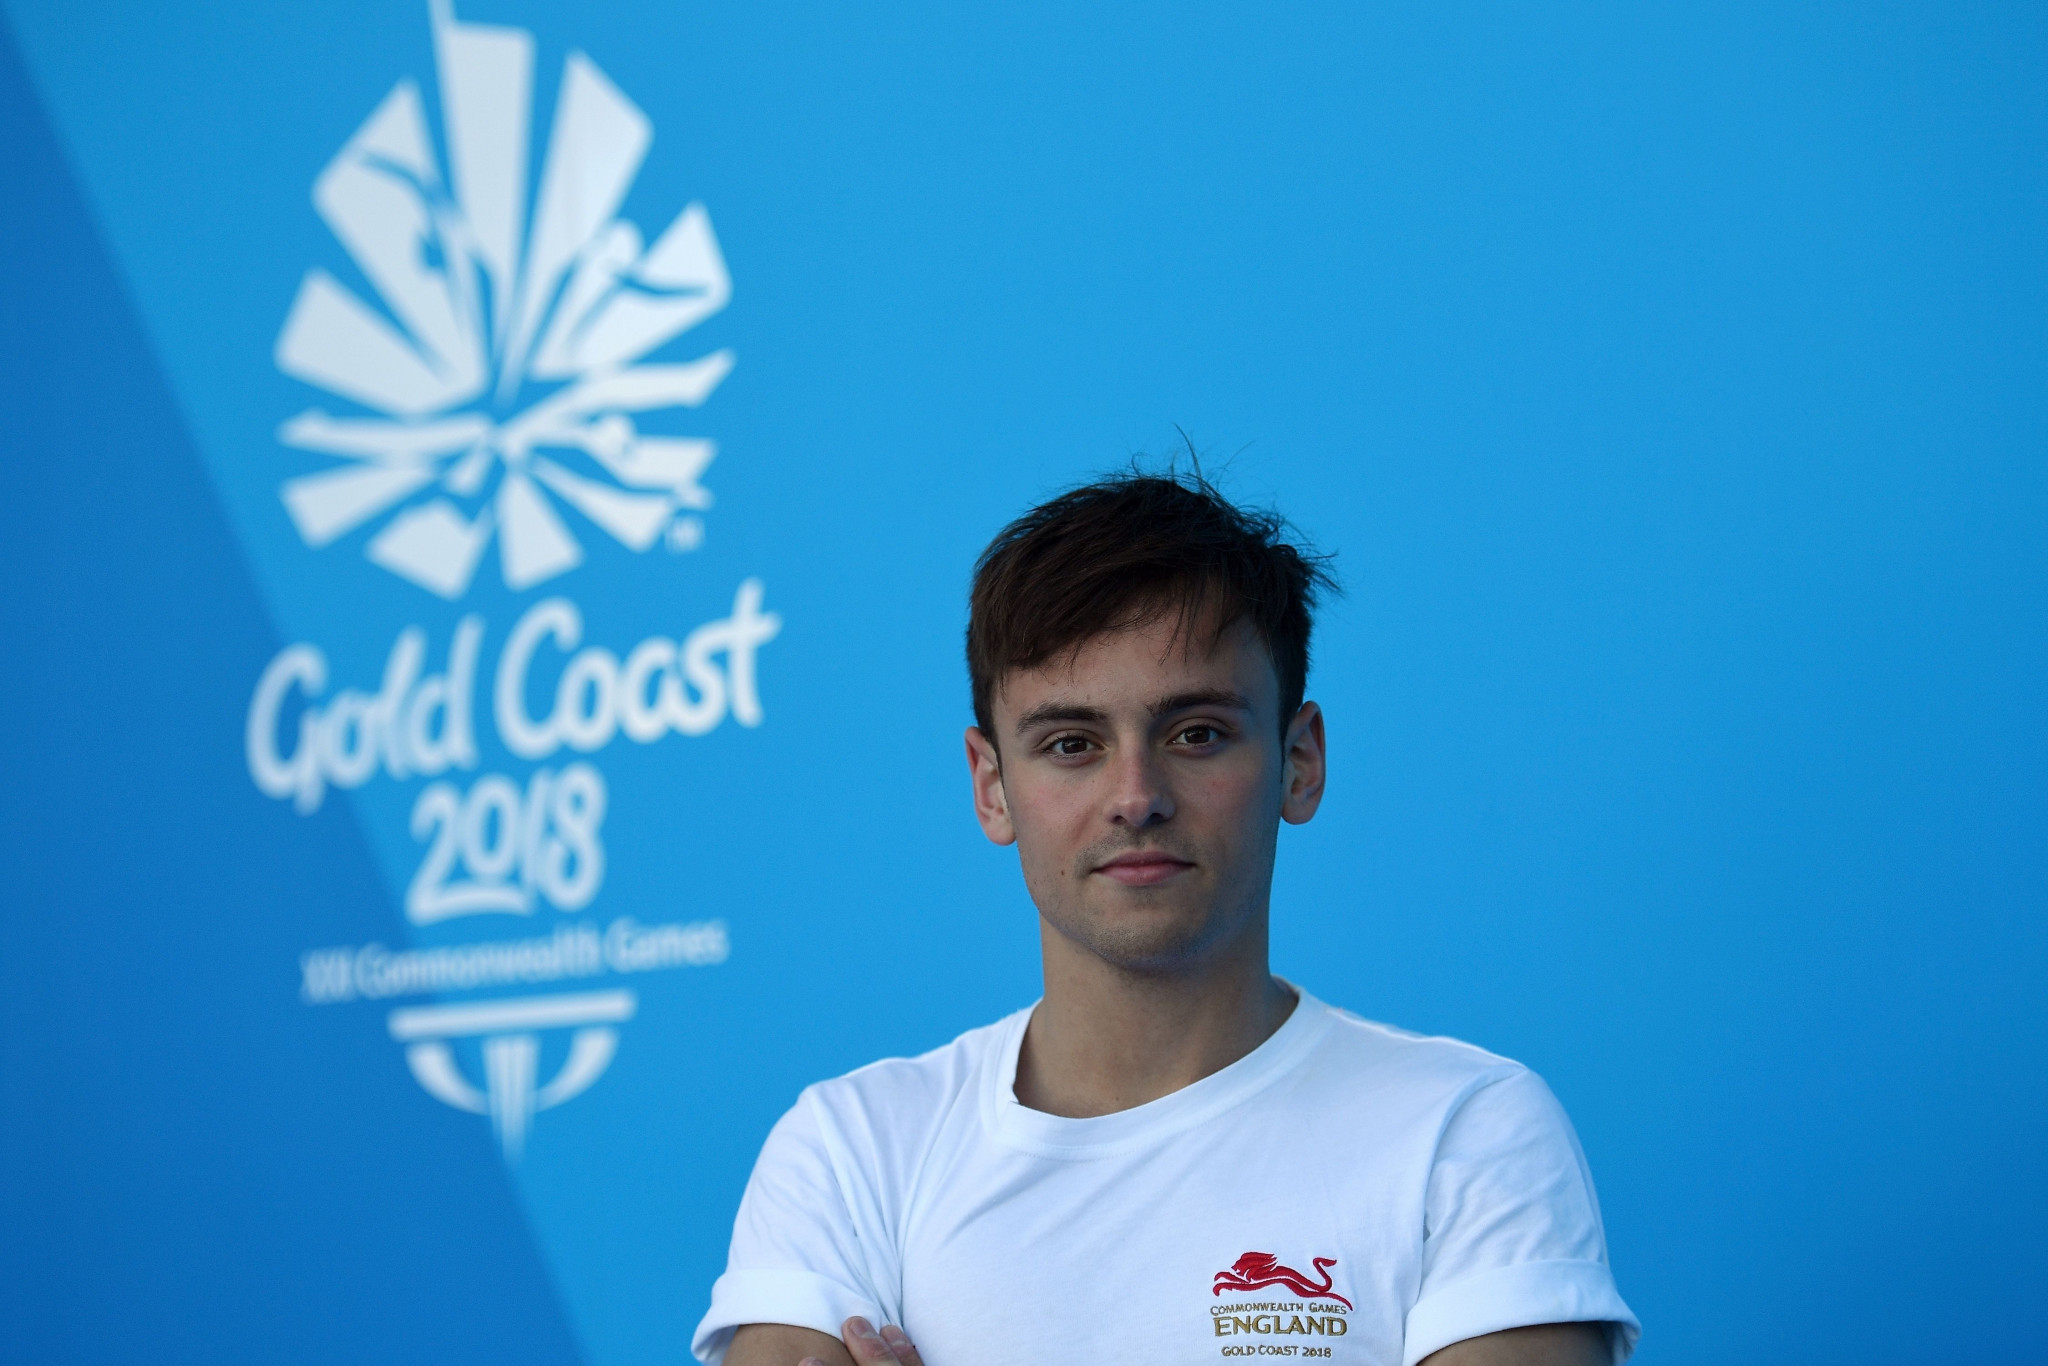 Seeing As Though I M At The Diving I Thought It Would Be An Ideal Time To Look Ahead And Mention That English Diving Star Tom Daley Will Make His Only Appearance At Gold Coast 2018 Tomorrow He Will Compete In The Men S Synchronised 10m Platform